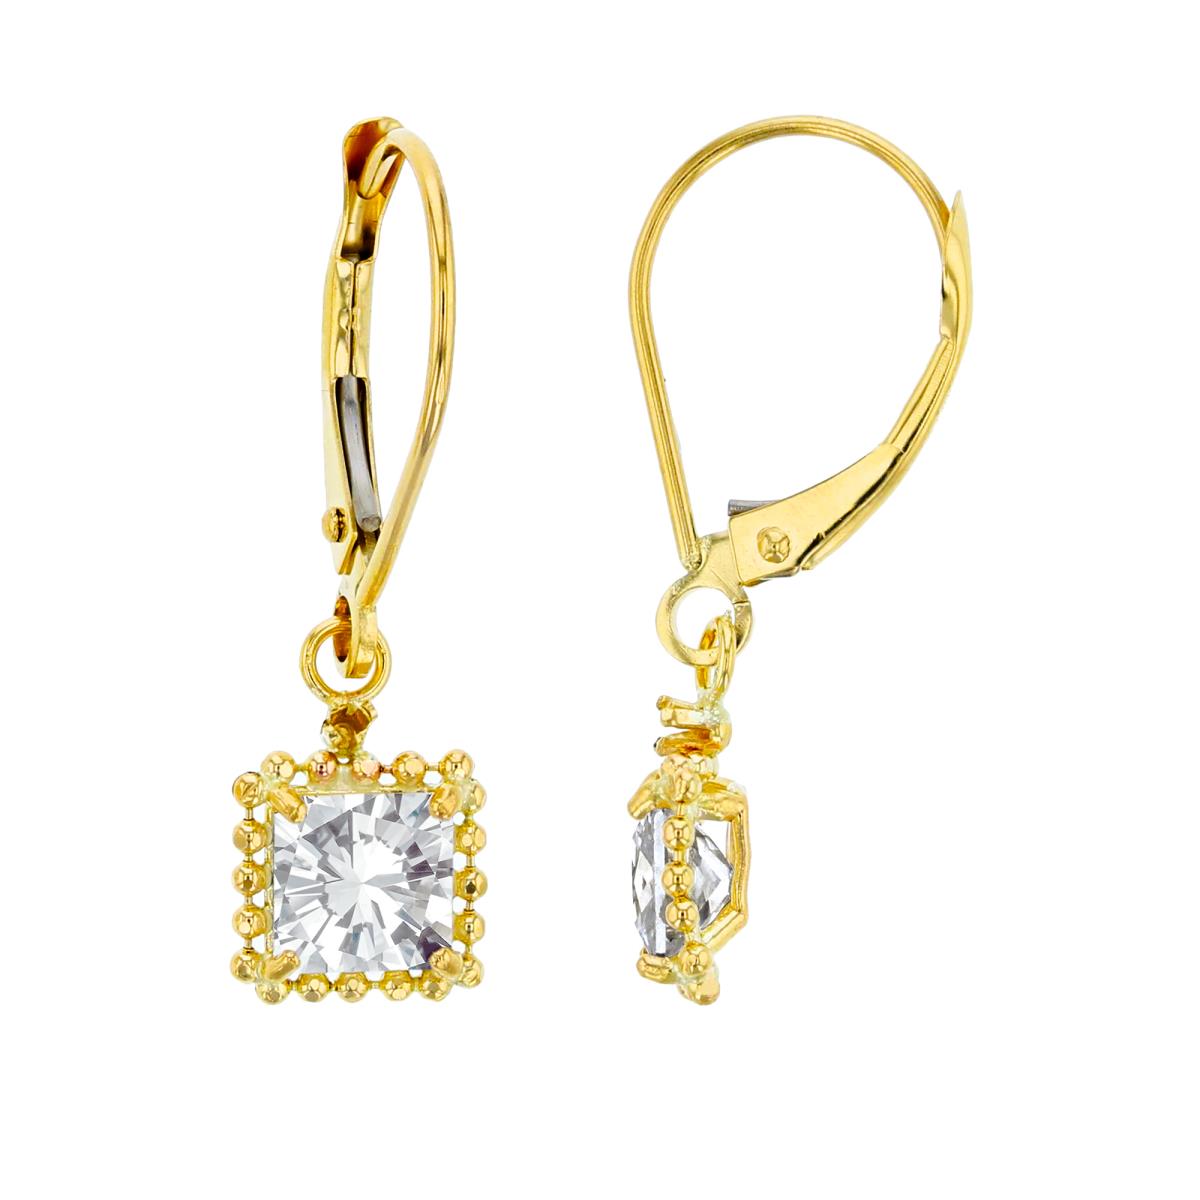 10K Yellow Gold 1.25mm Rd Created White Sapphire & 5mm Sq White Topaz Bead Frame Drop Lever-Back Earring